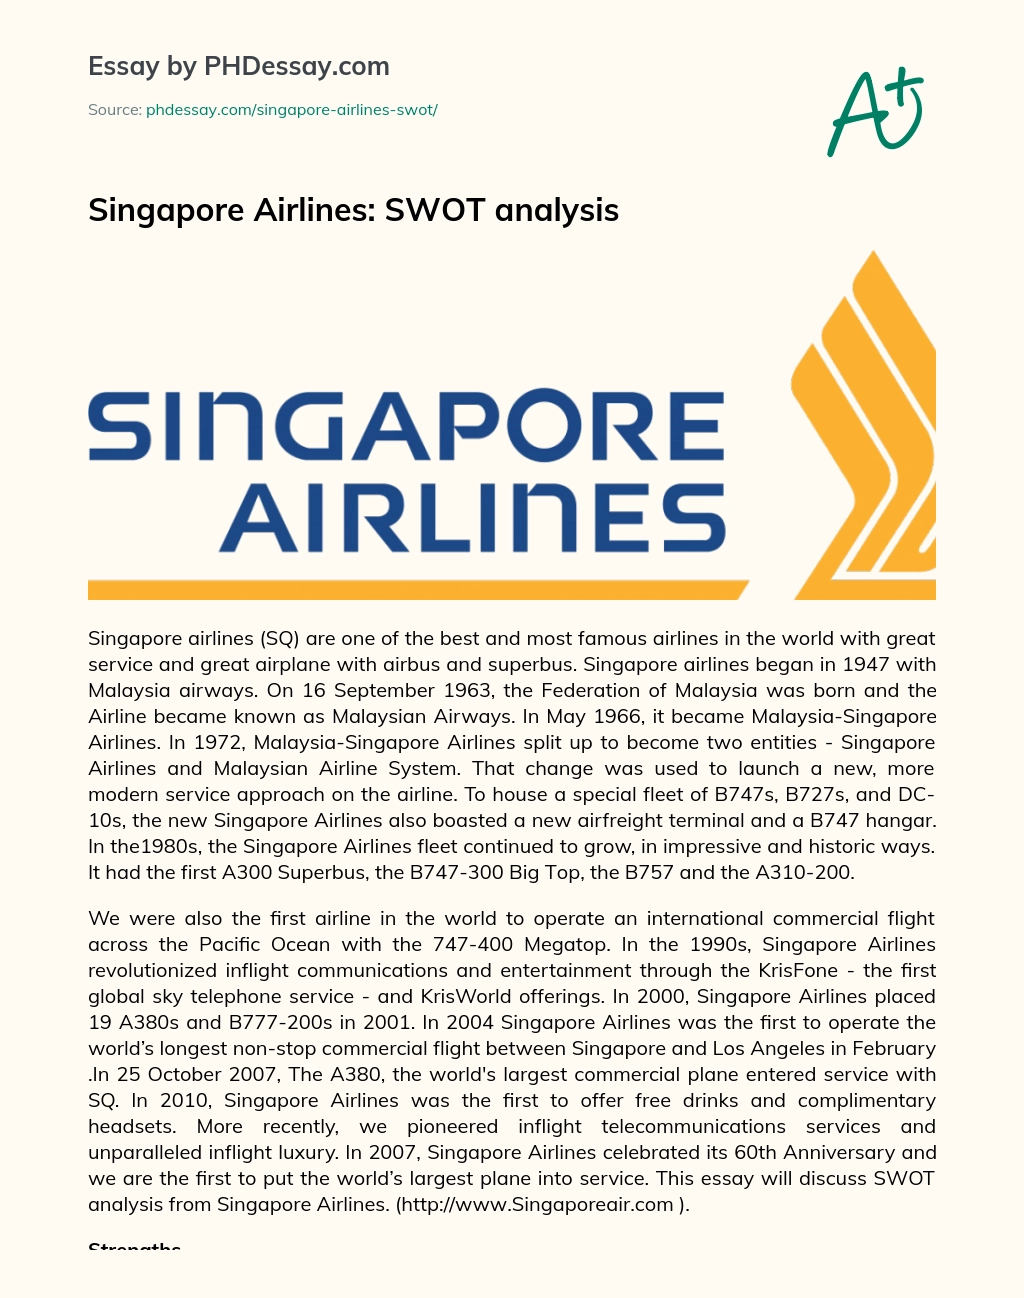 Singapore Airlines: SWOT analysis essay